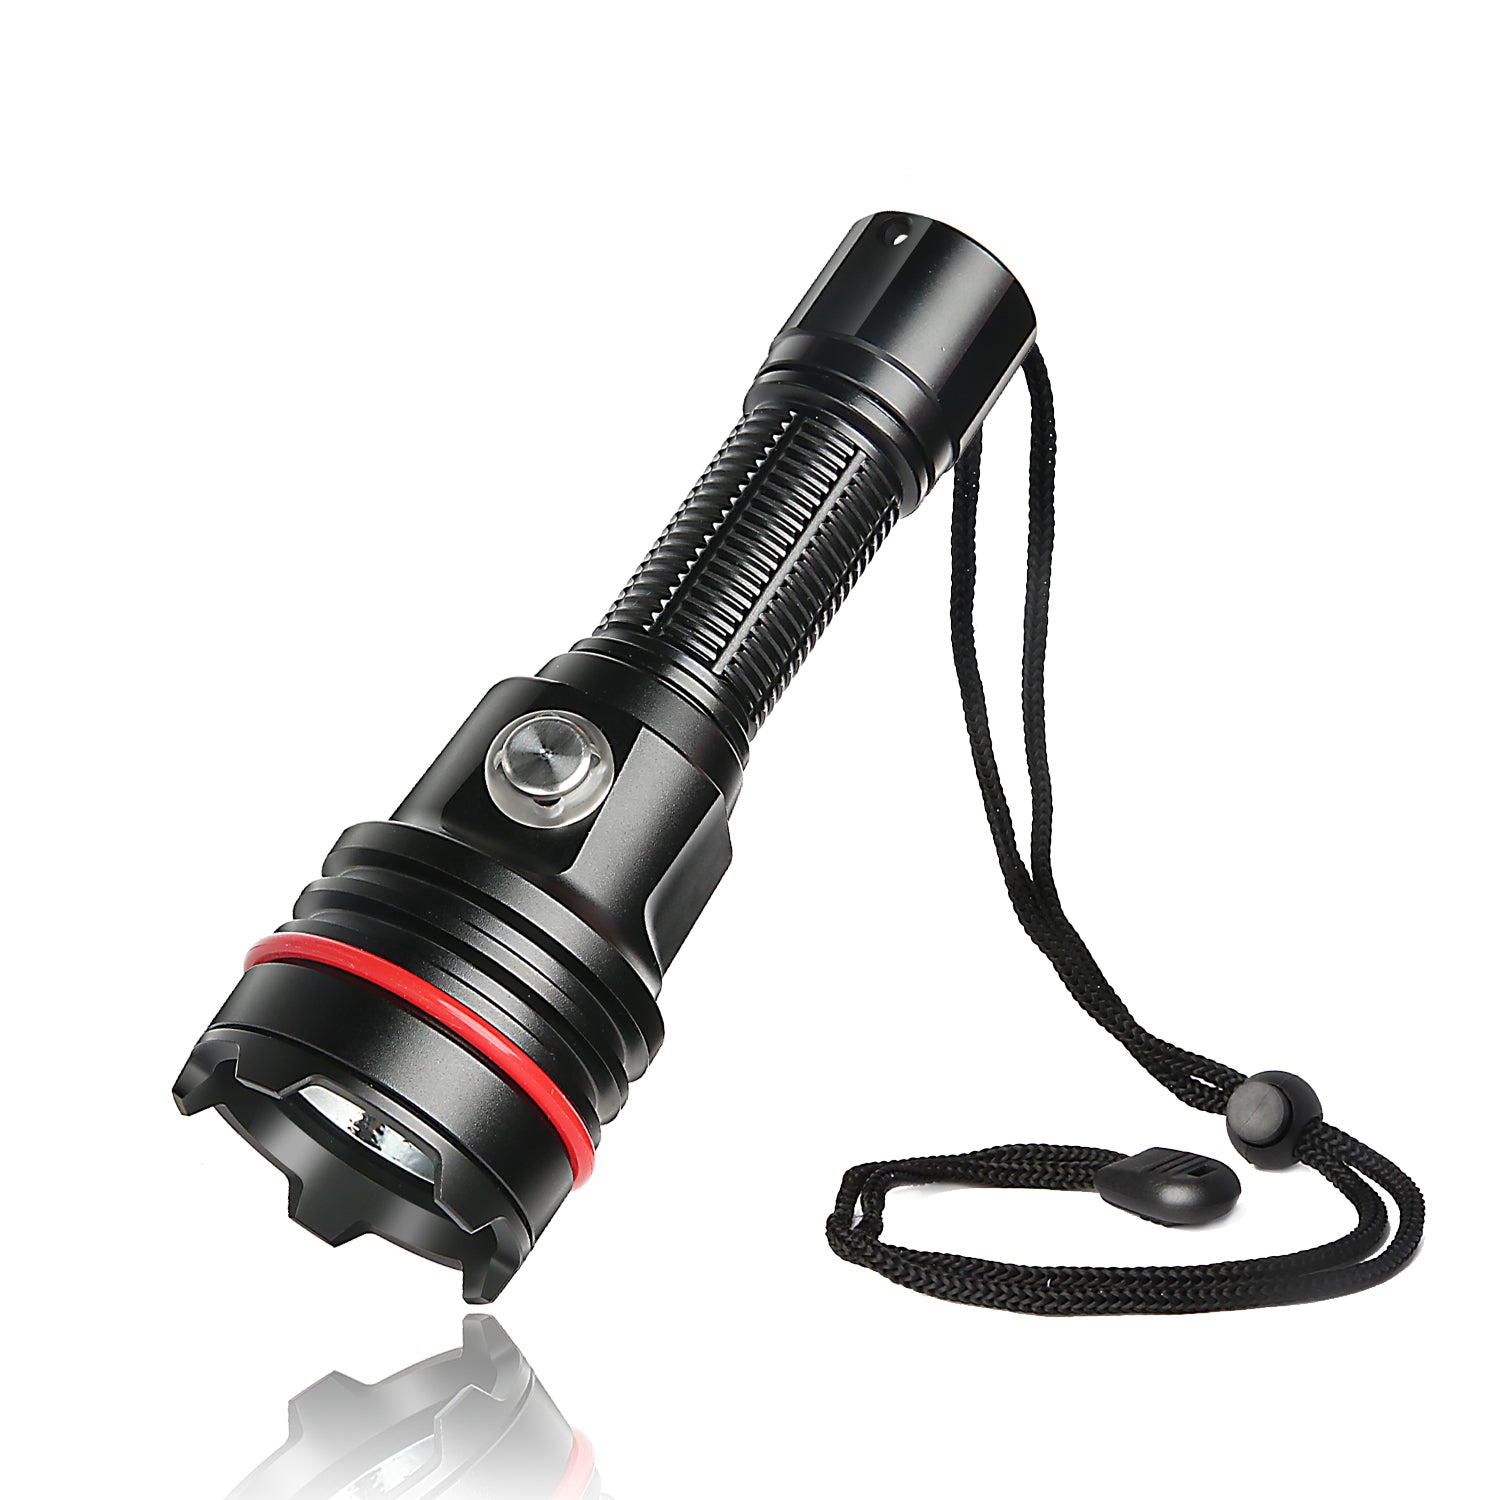 LIVARNO LUX LED Torch with Power Bank 